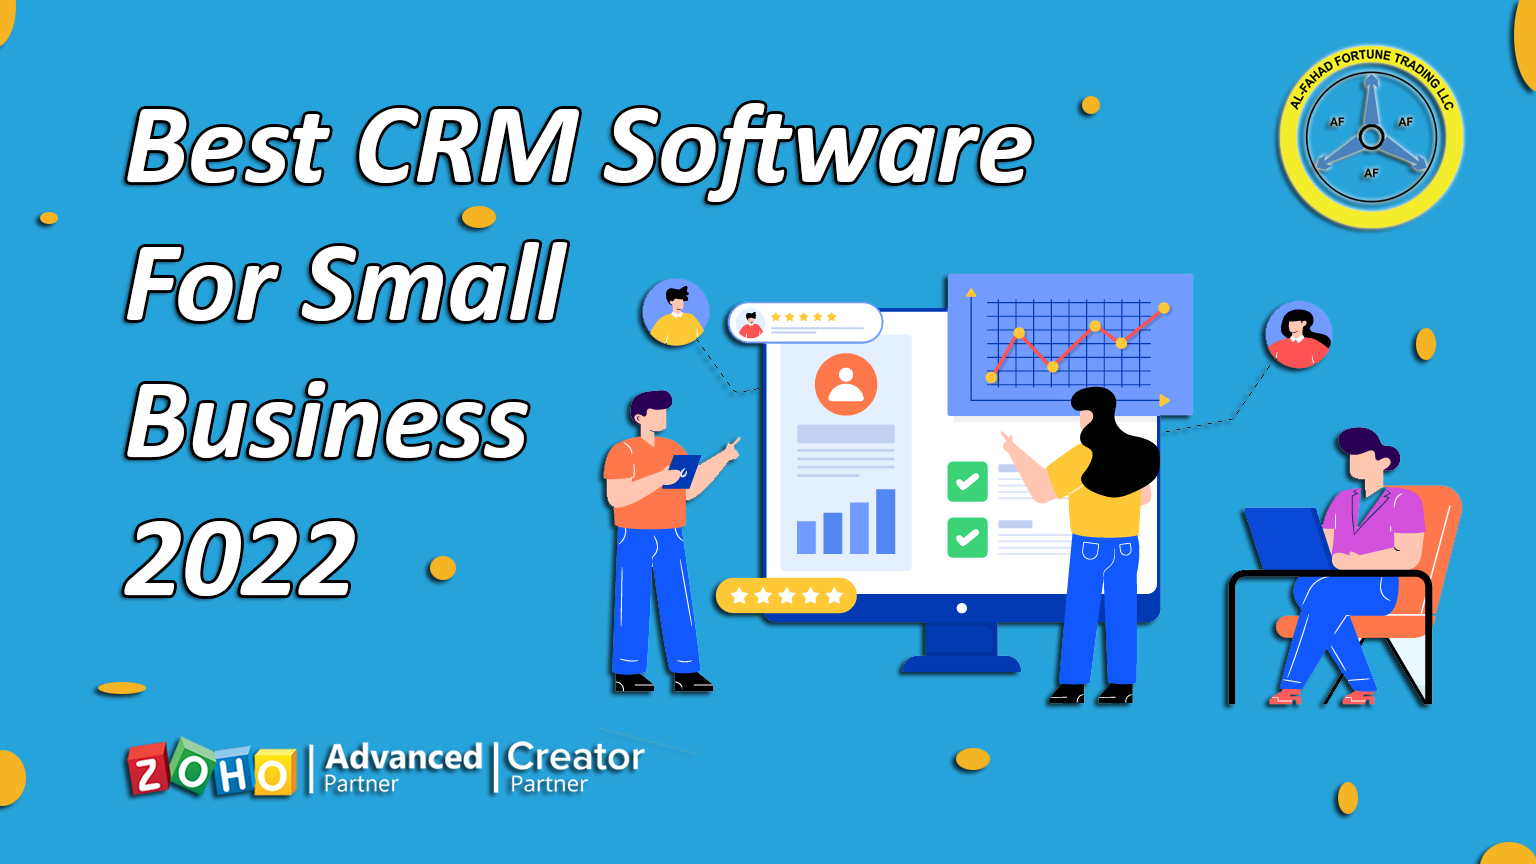 Best CRM Software For Small Business 2022